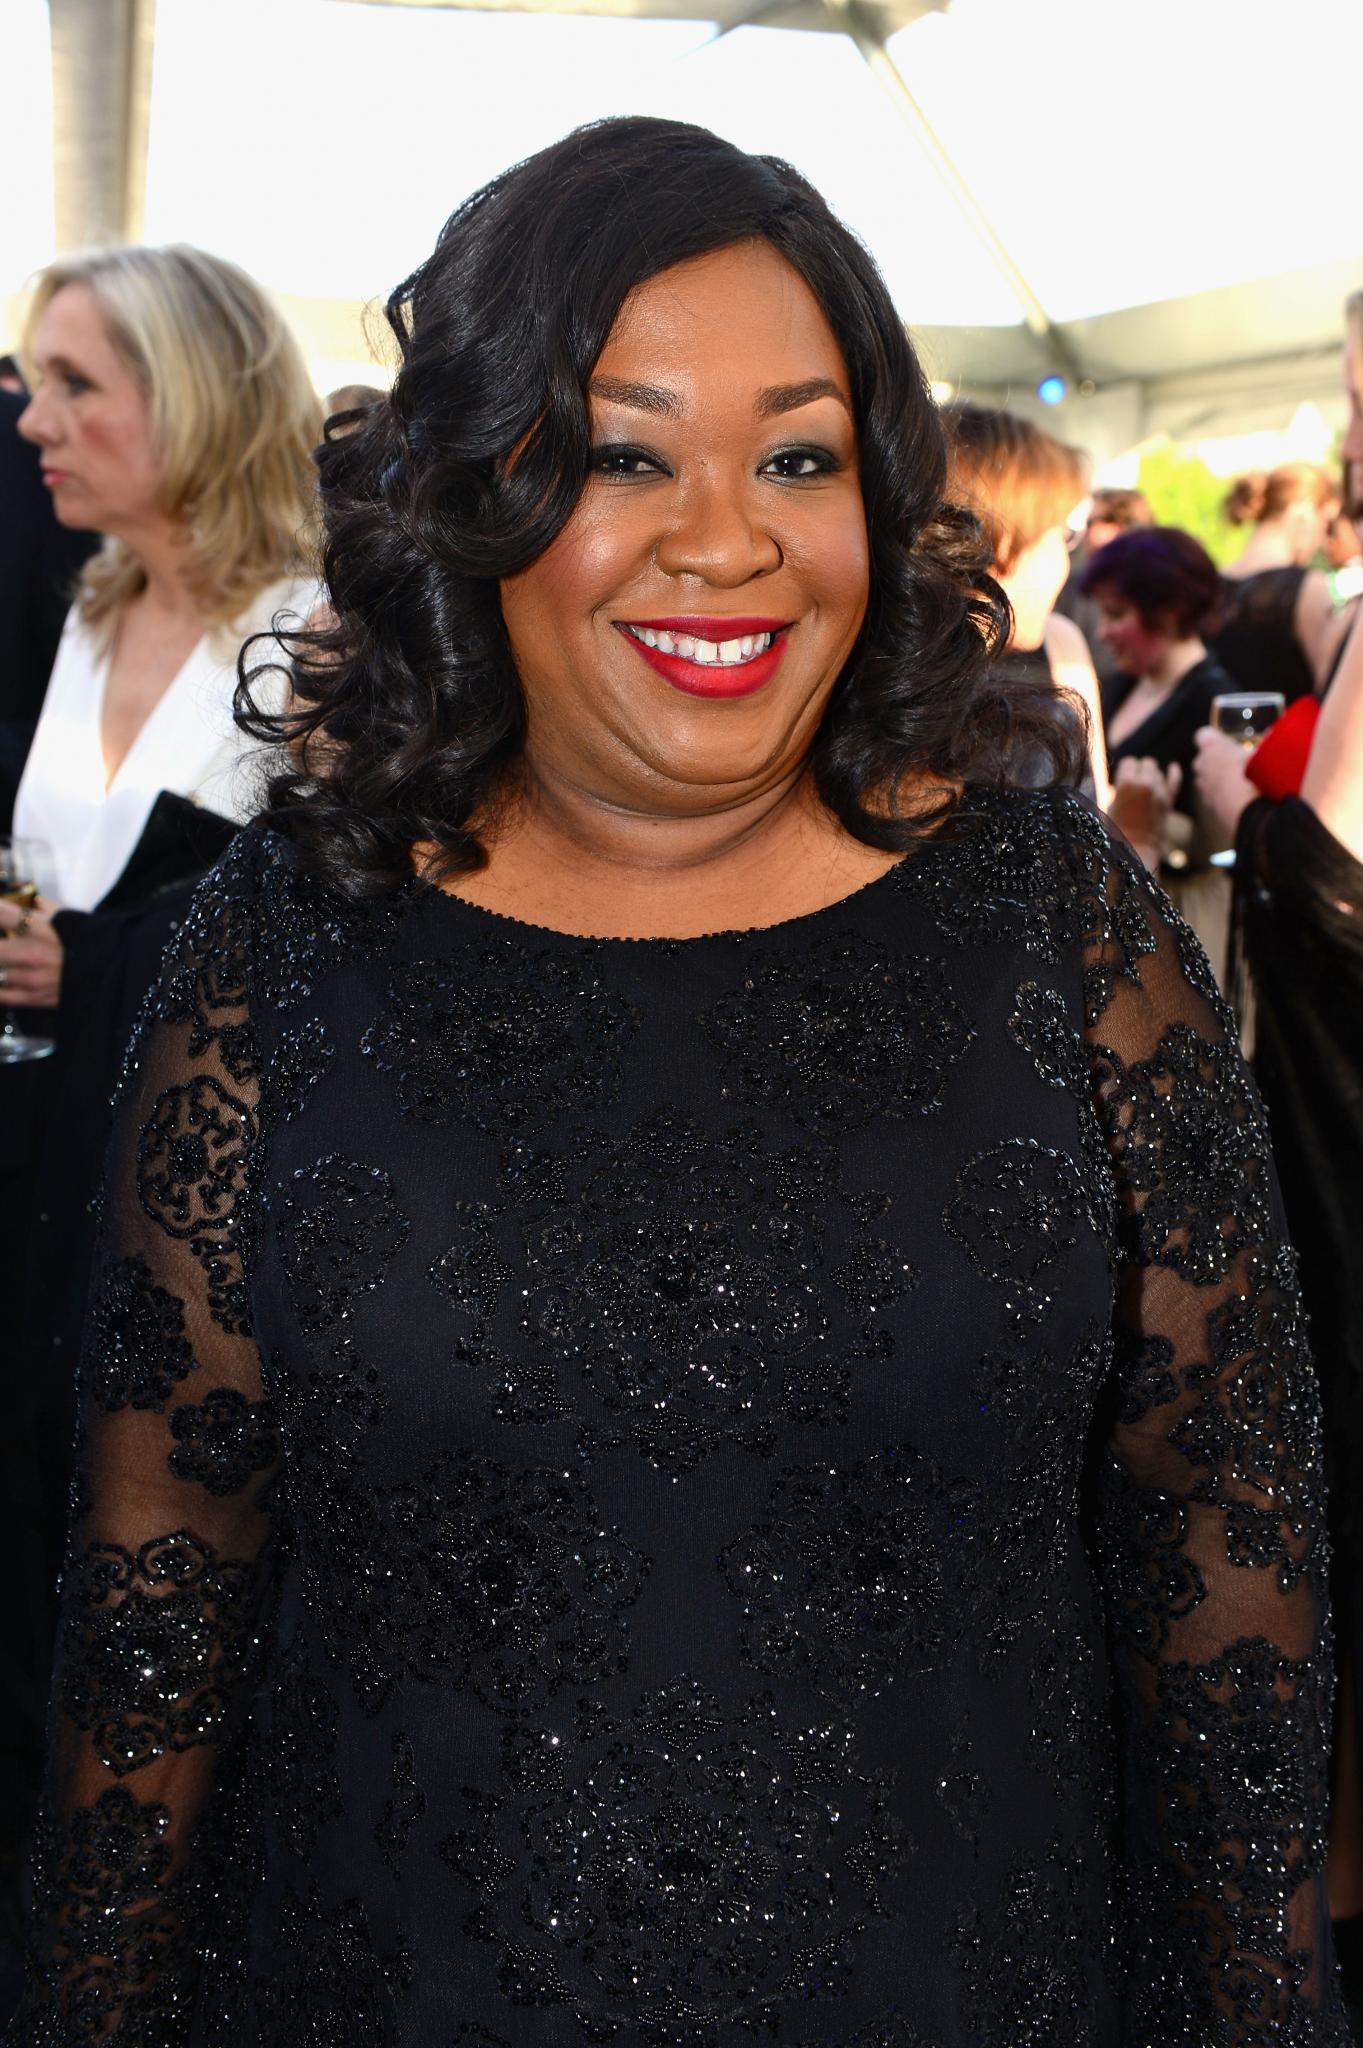 Obama Appoints Shonda Rhimes to Kennedy Center Board
